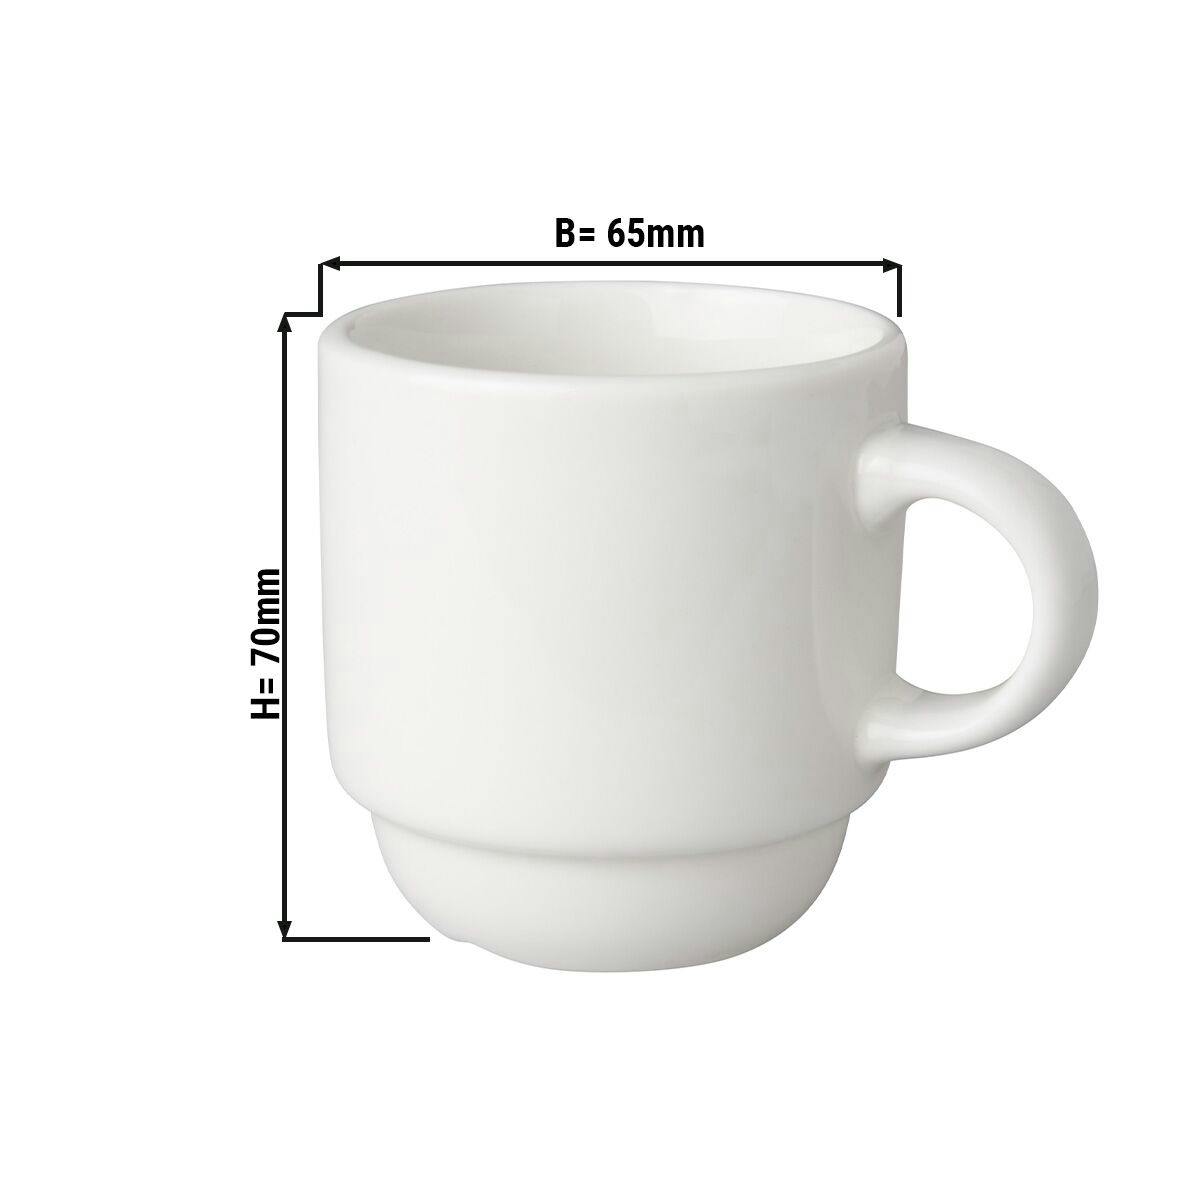 (12 pieces) BUDGETLINE  Coffee cup Mammoet - 14 cl - White